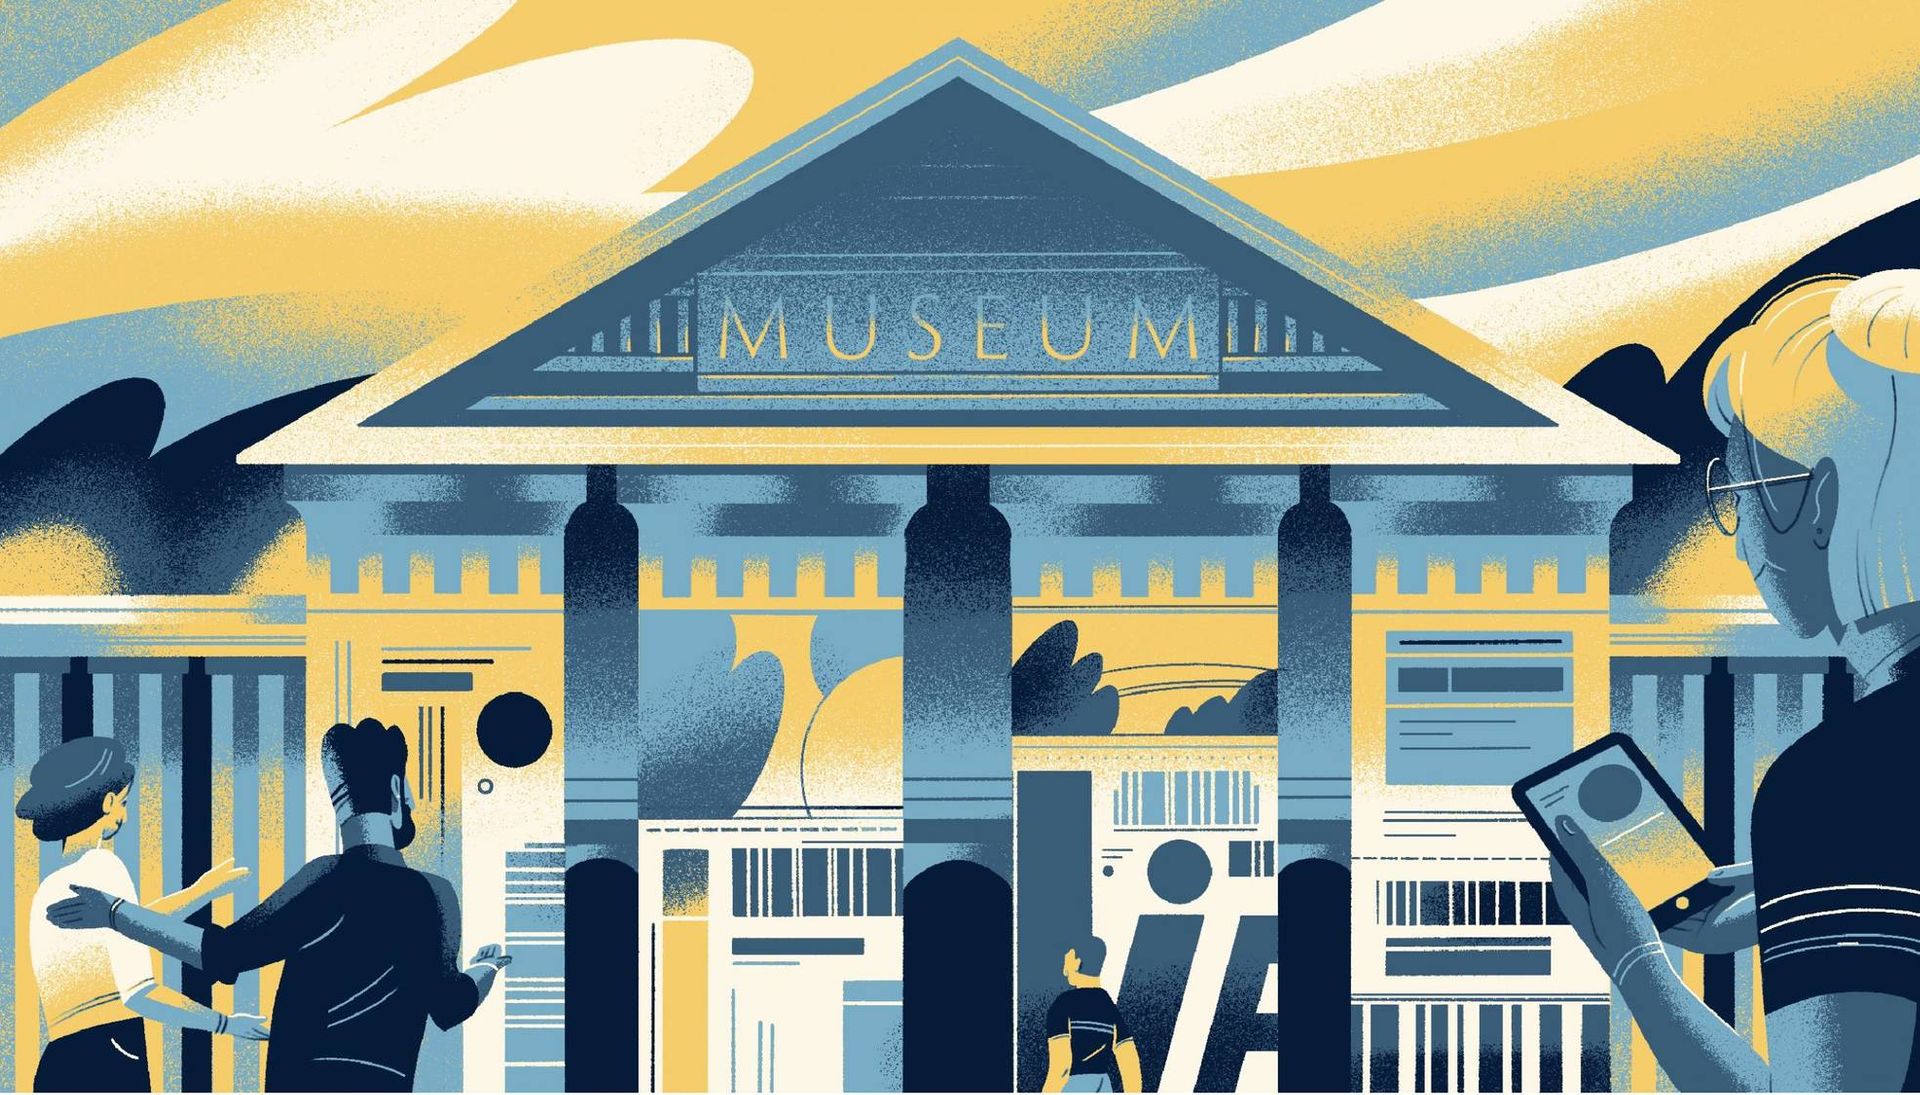 An illustration of the exterior of a museum.